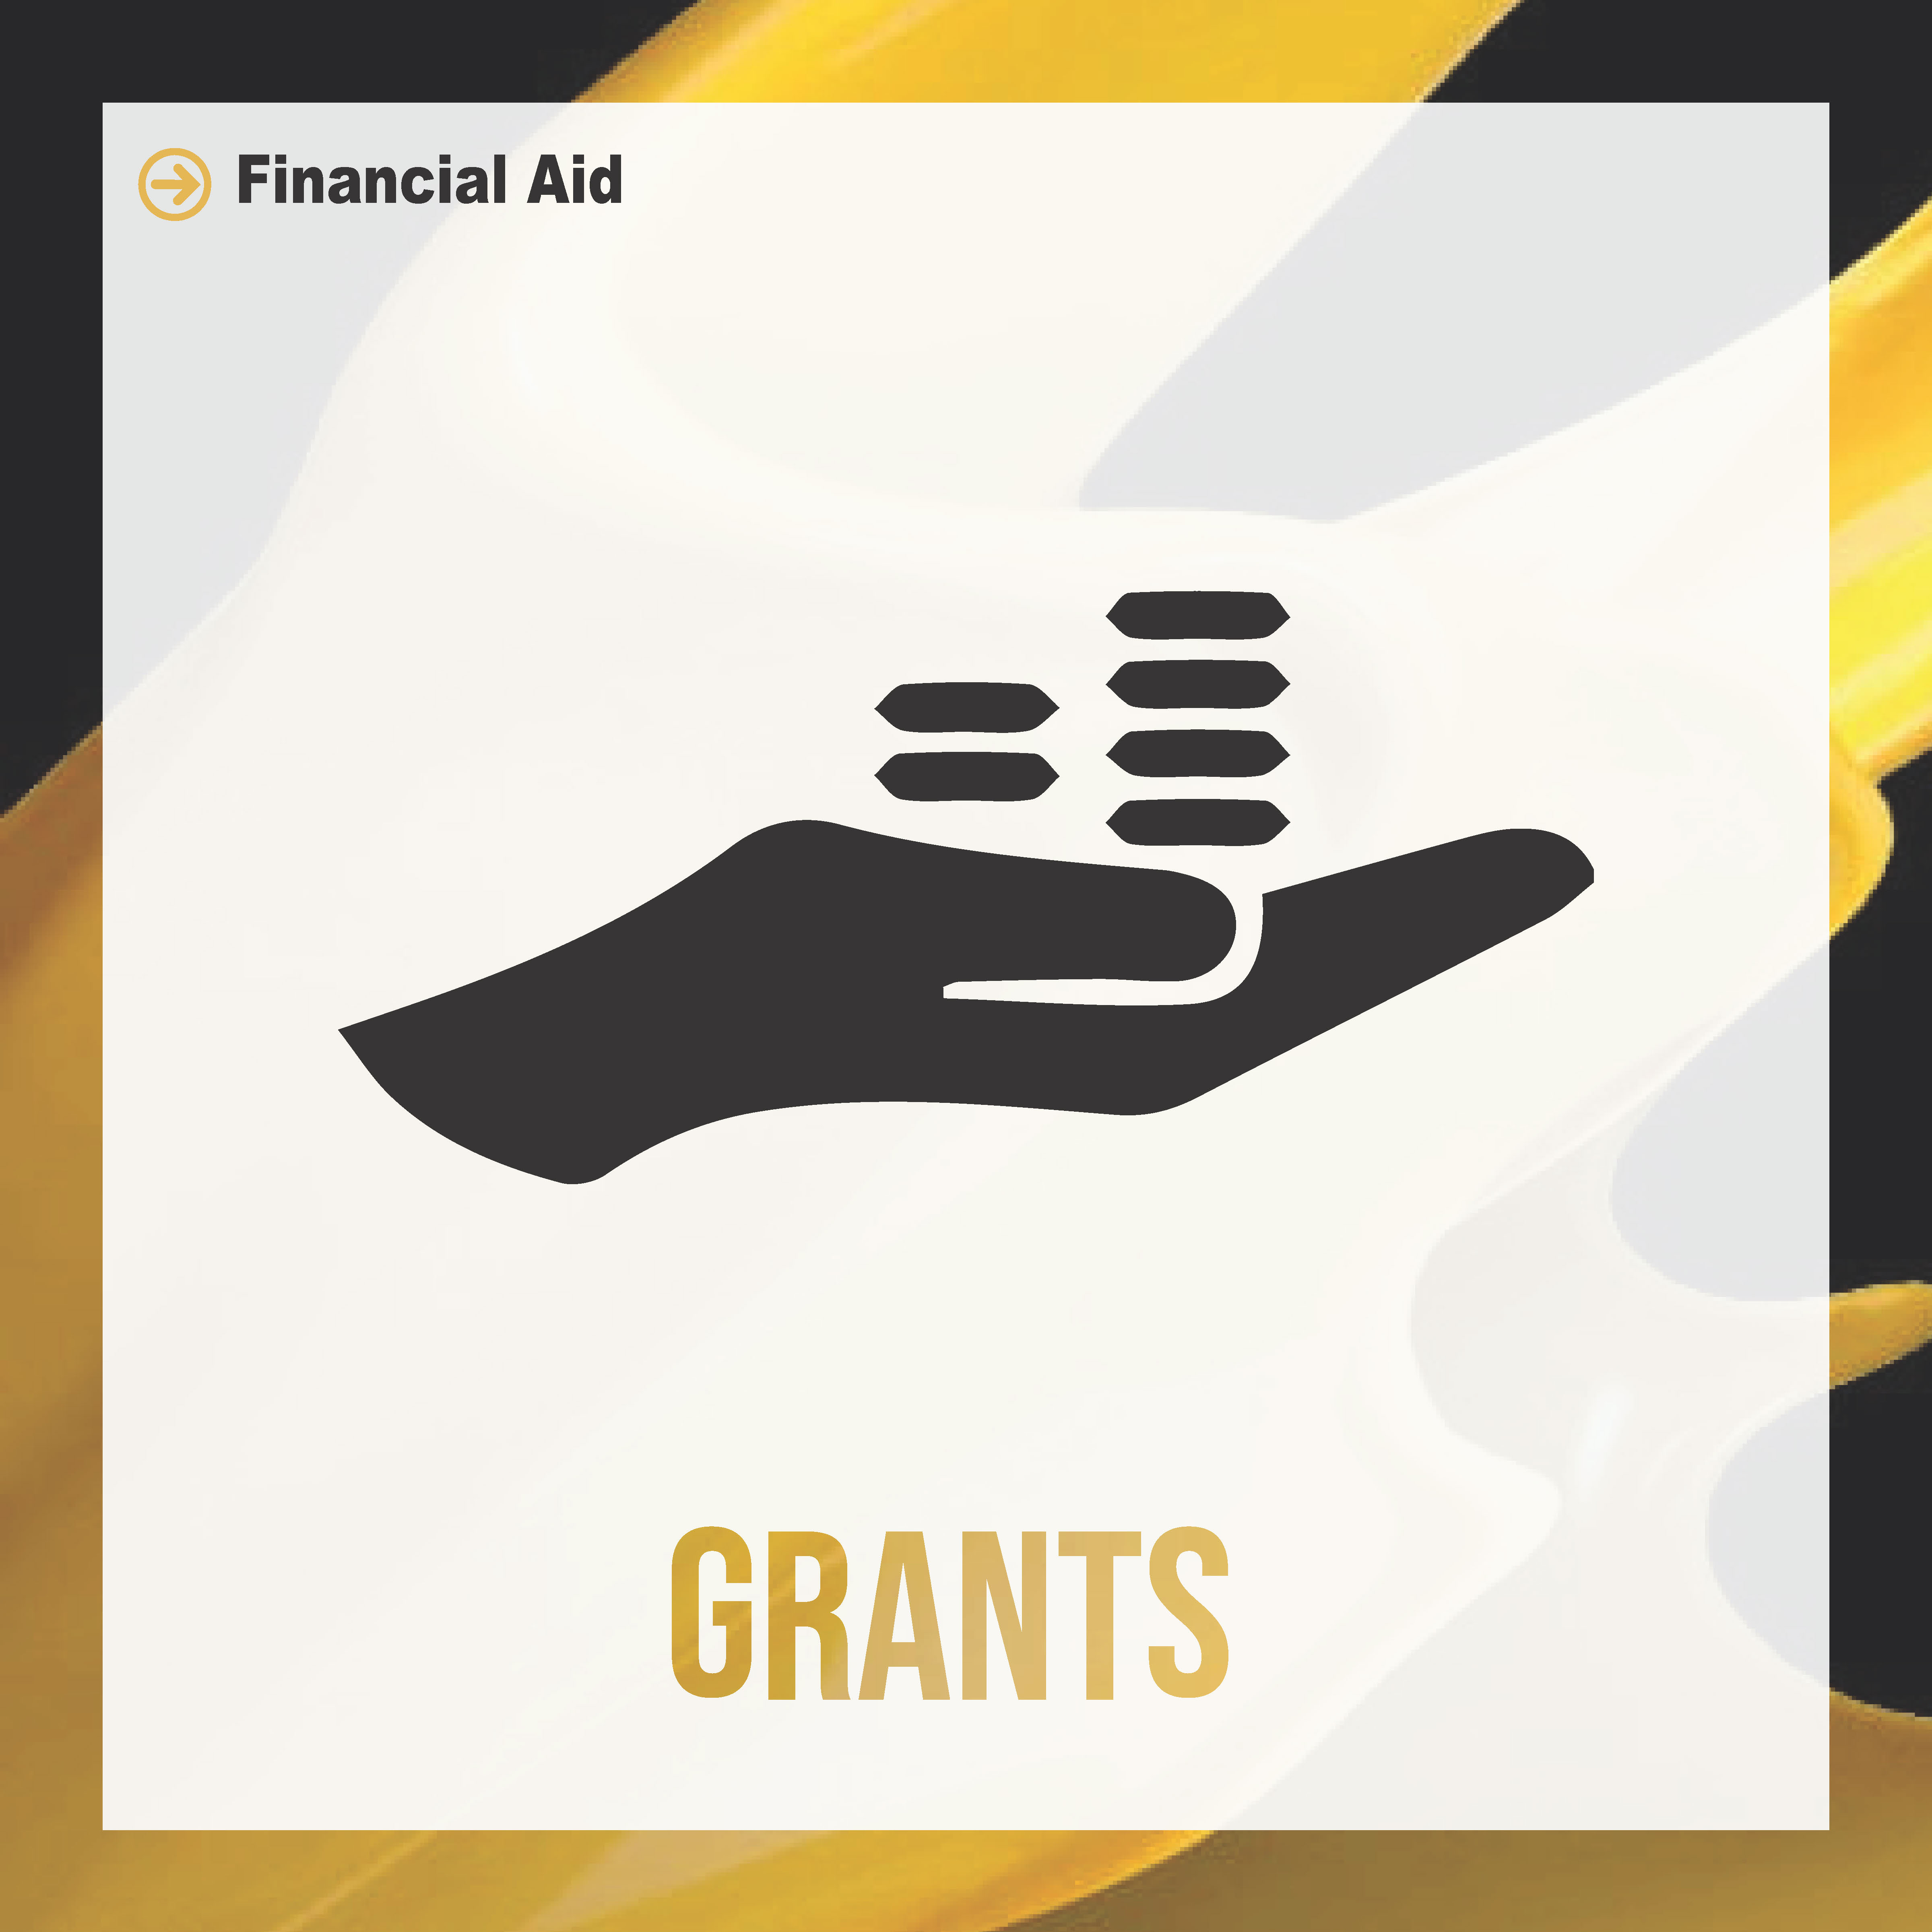 Financial Aid Grants (with circles and arrows)